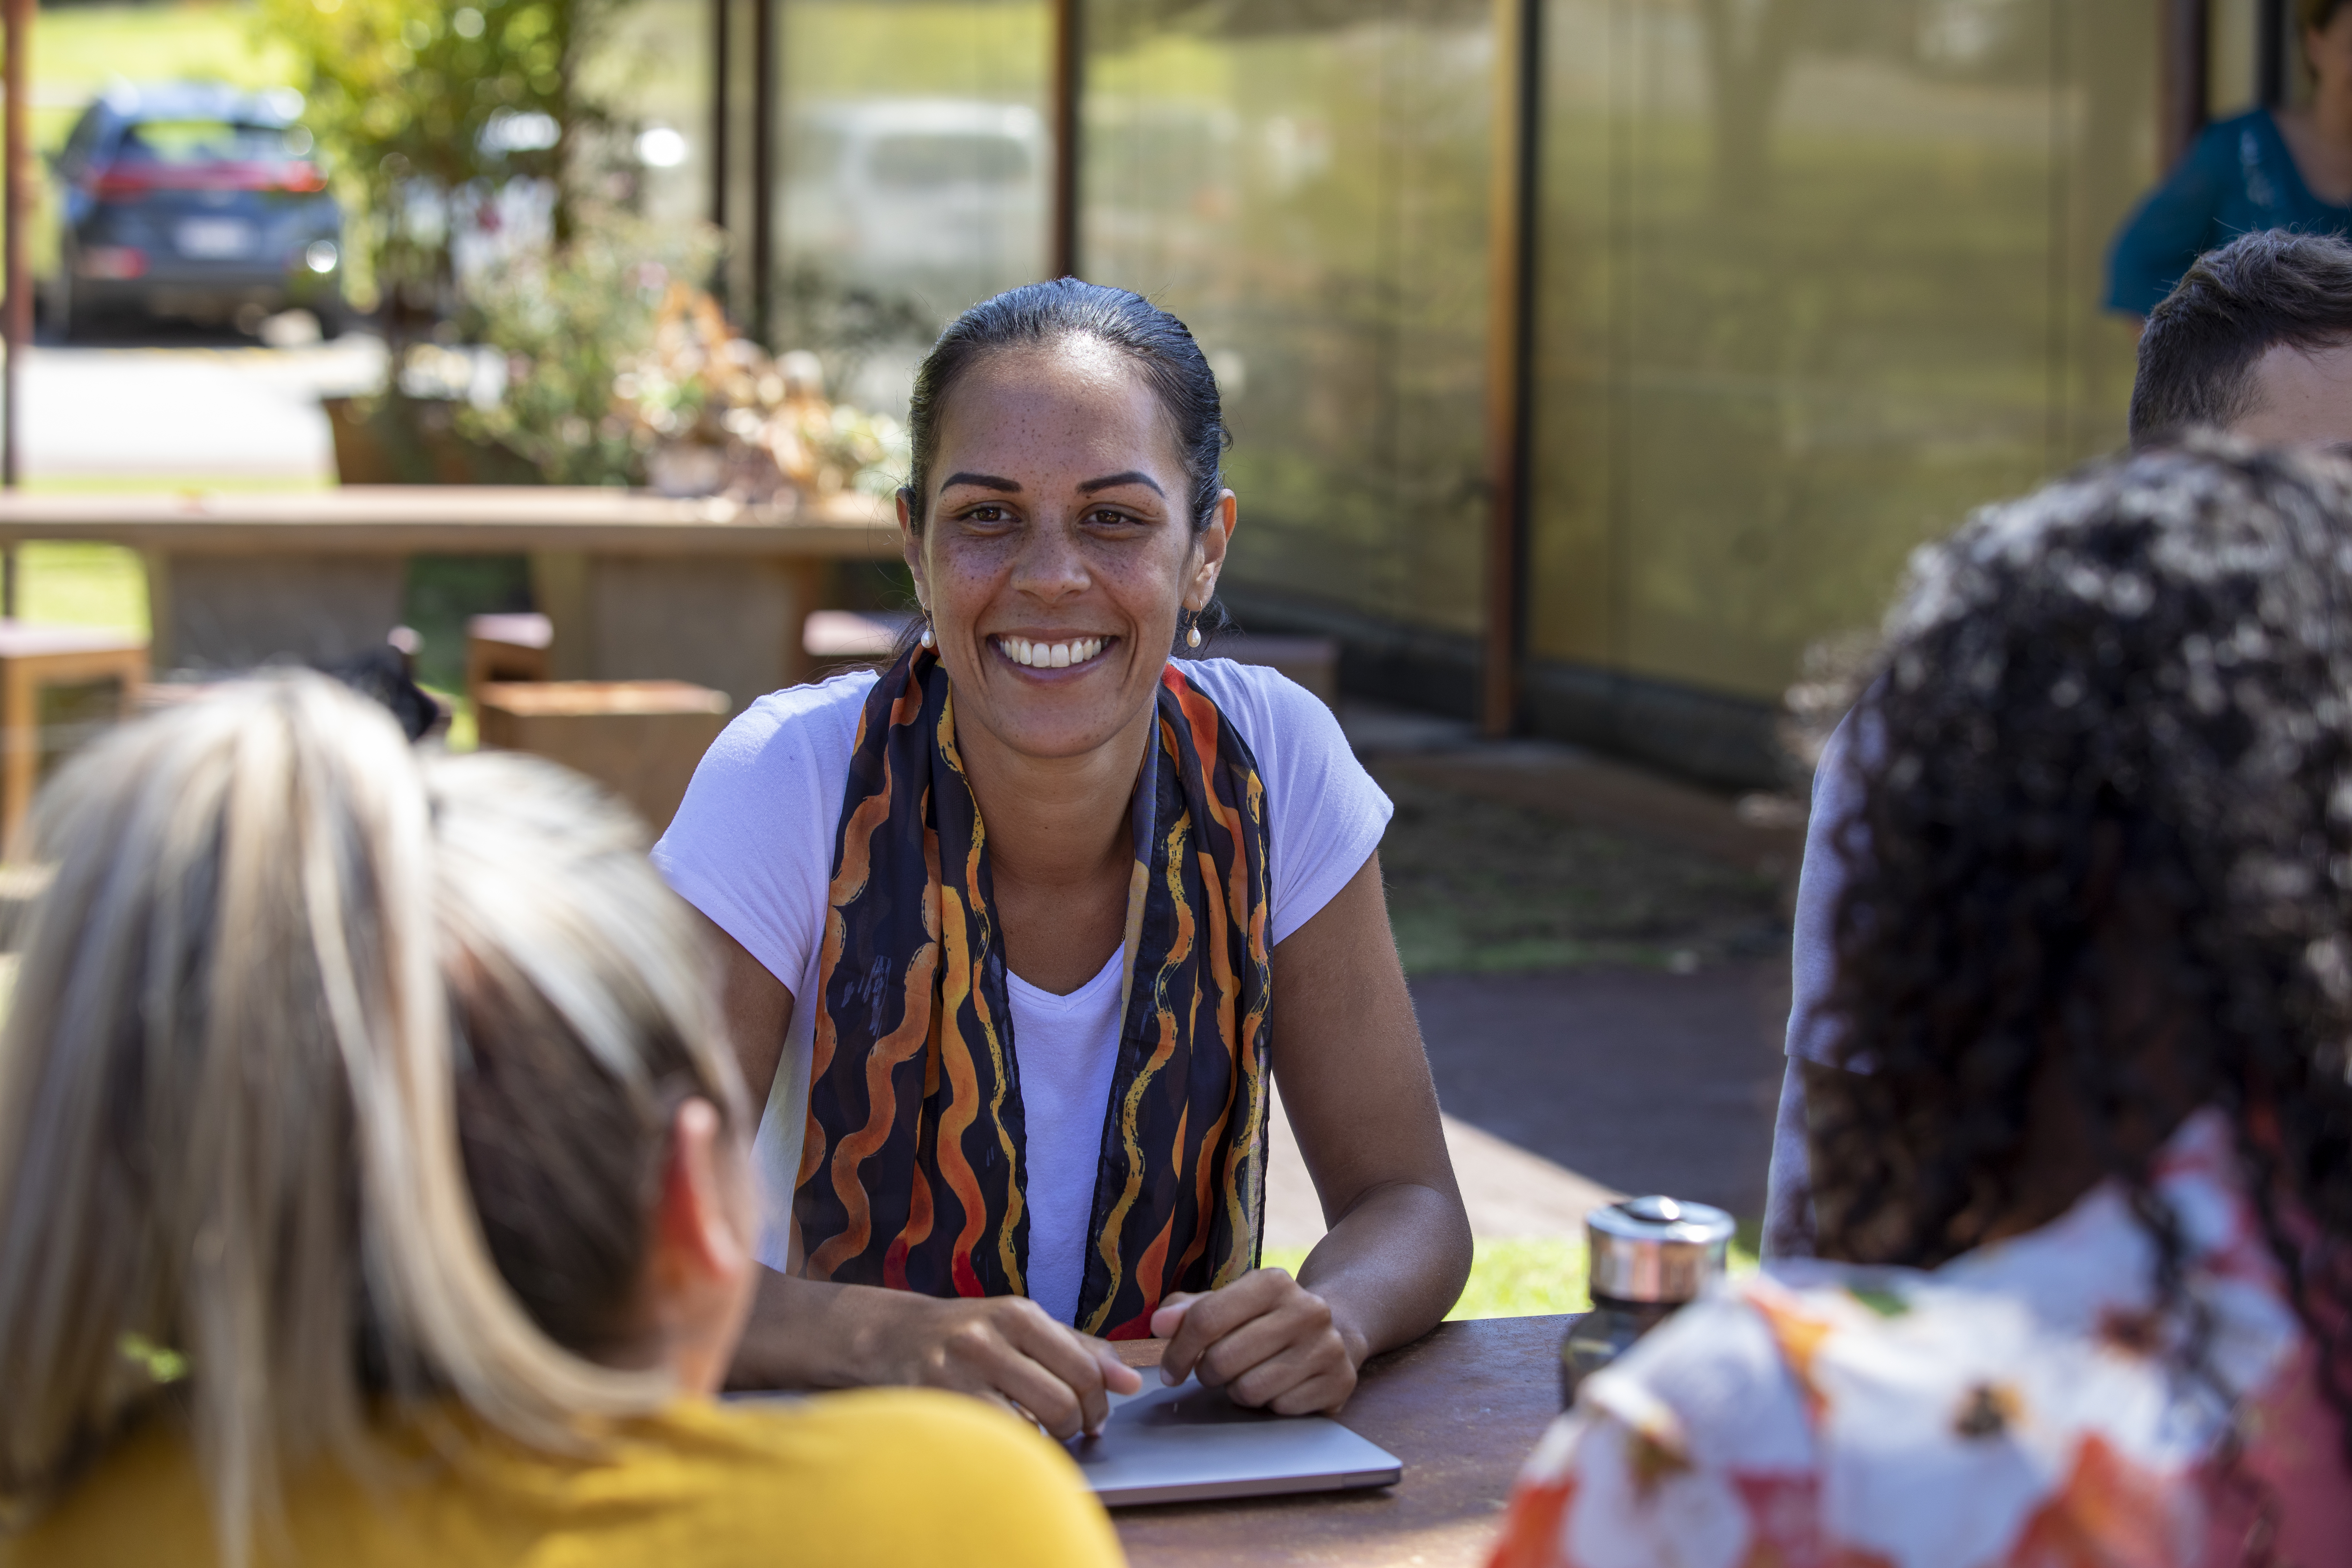 An Aboriginal woman talking with peers at a table.